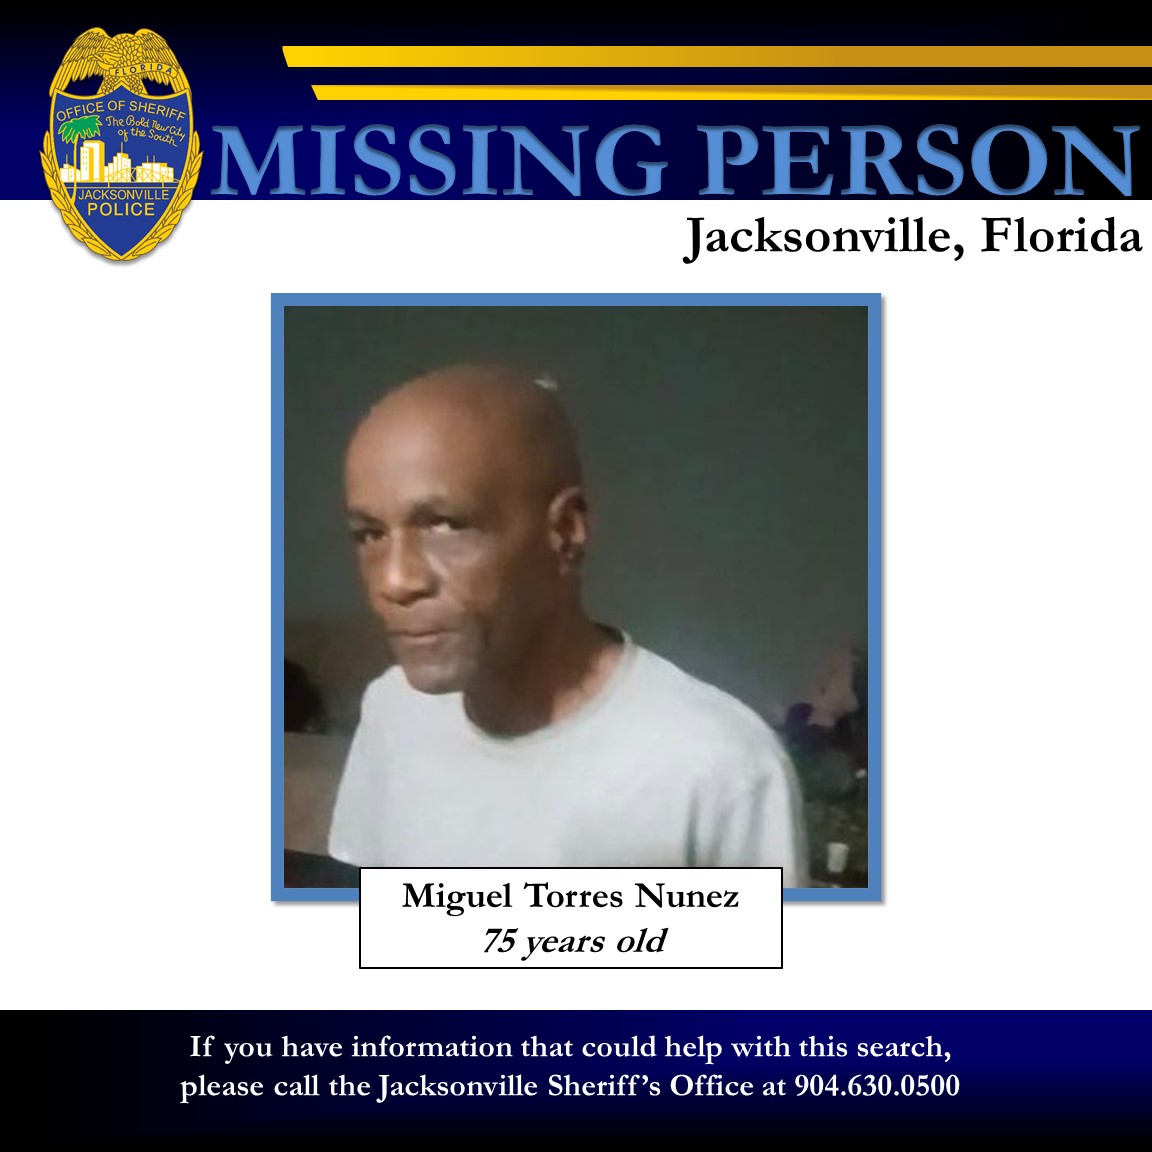 UPDATE: Mr. Miguel Torres Nunez has been located. Thank you for your assistance. Missing Endangered Adult The Jacksonville Sheriff’s Office is currently searching for a missing endangered adult. At approximately 12:00 p.m., Officers responded to the 5800 block of University…